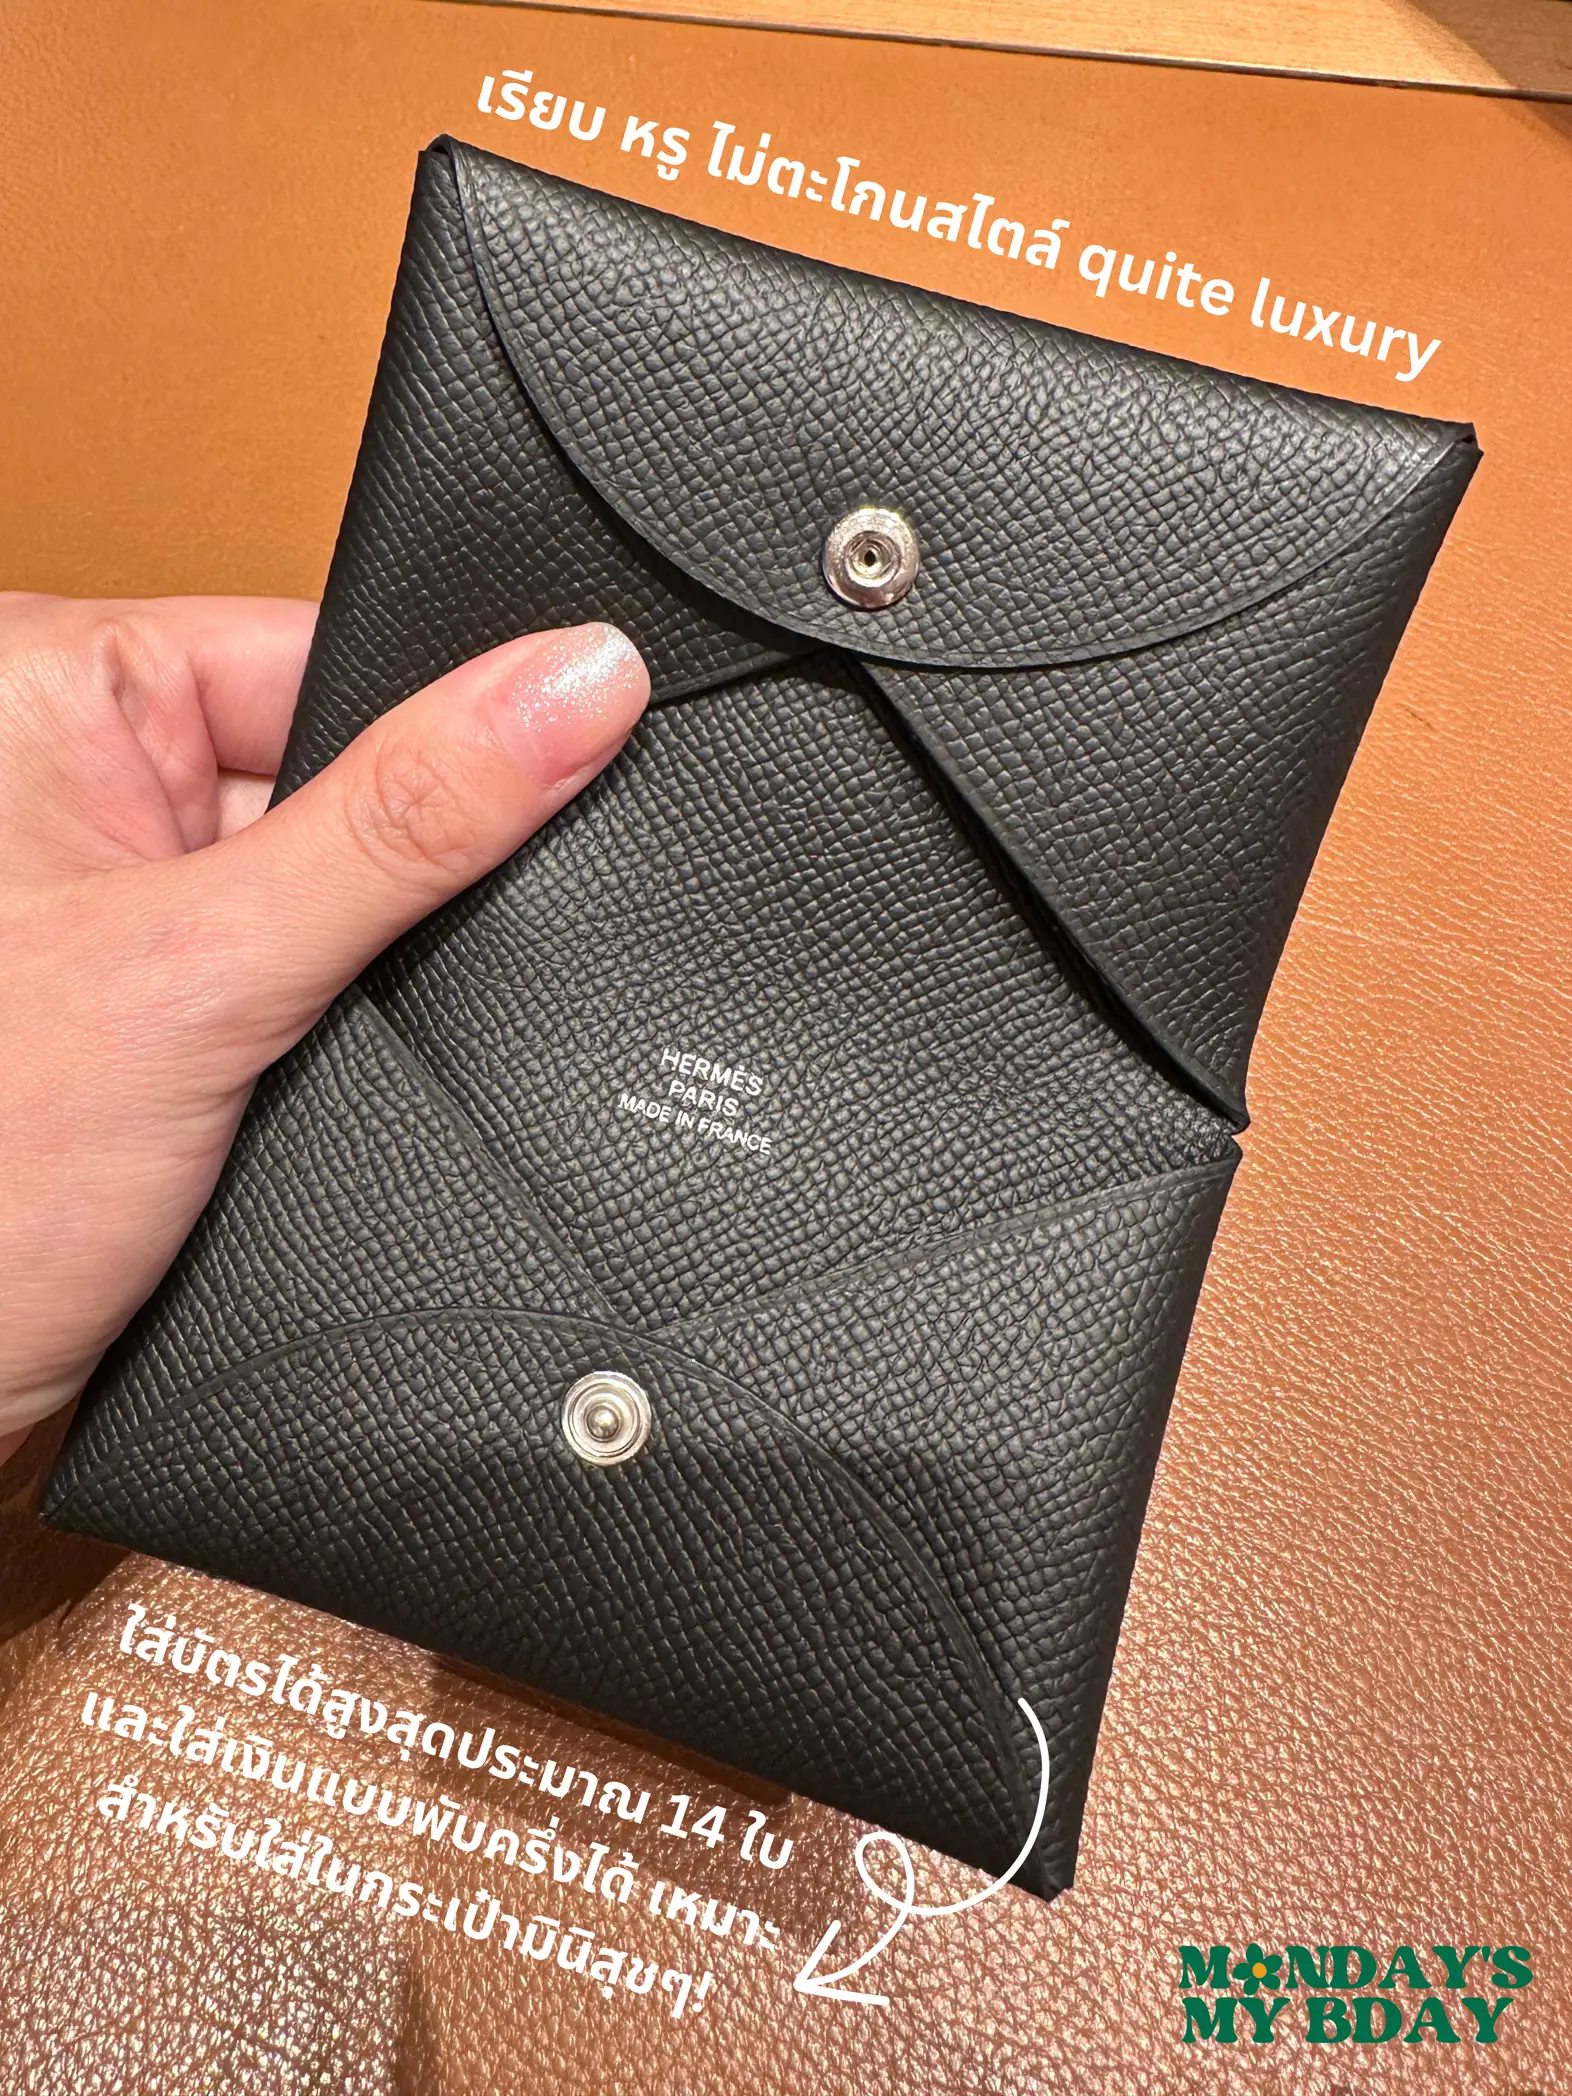 Hermes Calvi Cardholder Review - Pros, Cons, and Is It Worth It